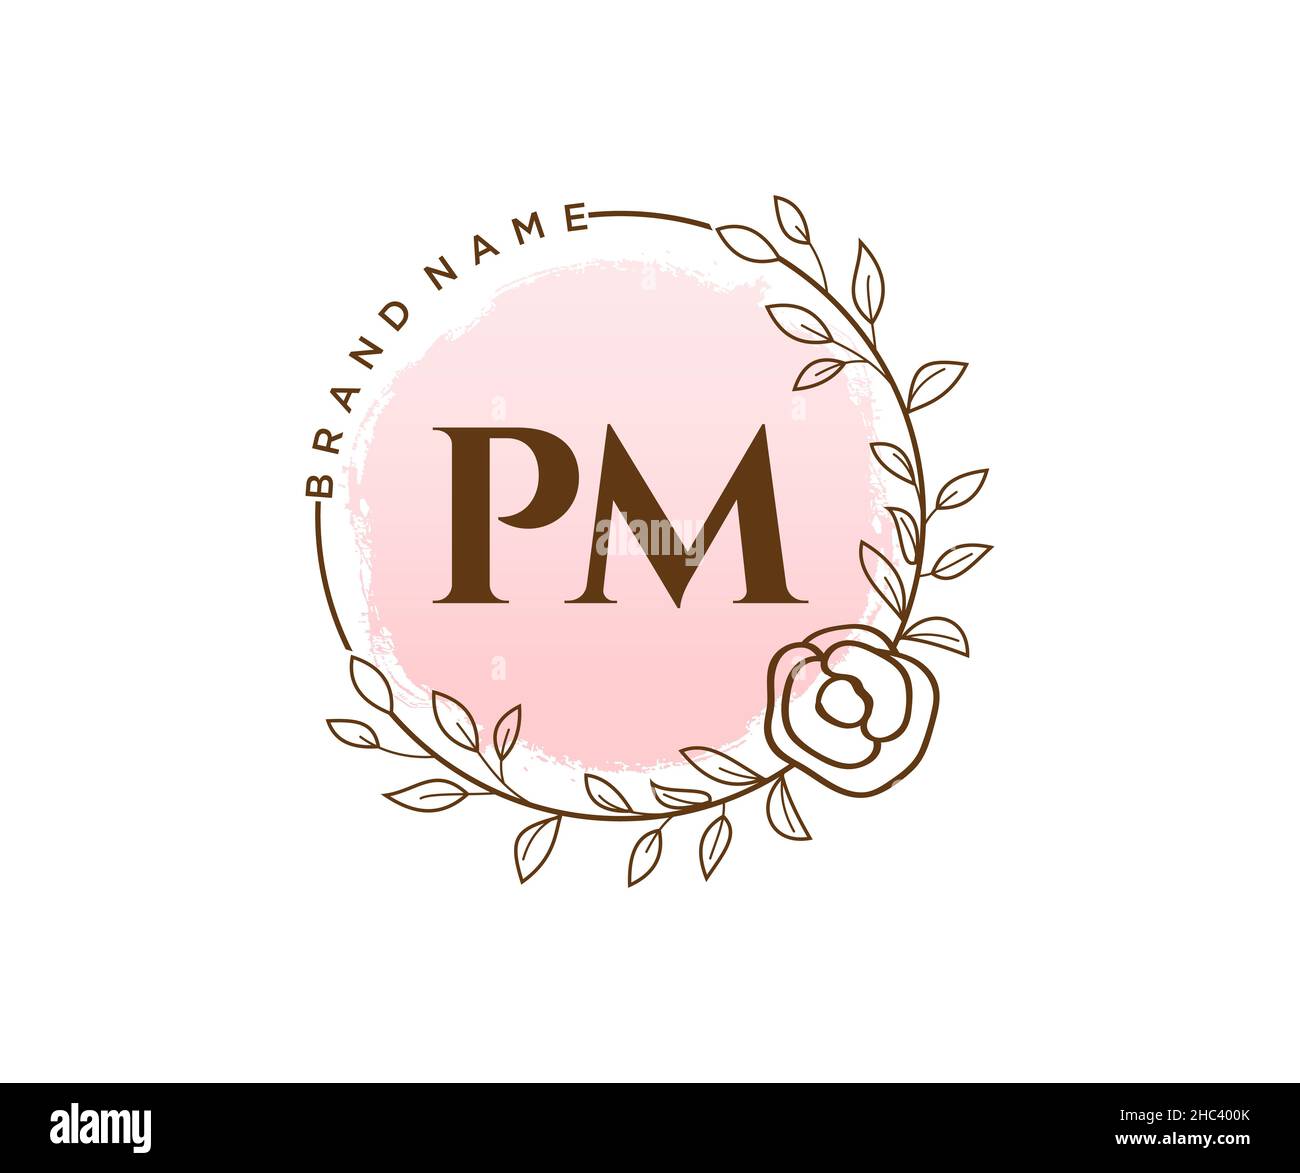 Pm initials logo Cut Out Stock Images & Pictures - Alamy